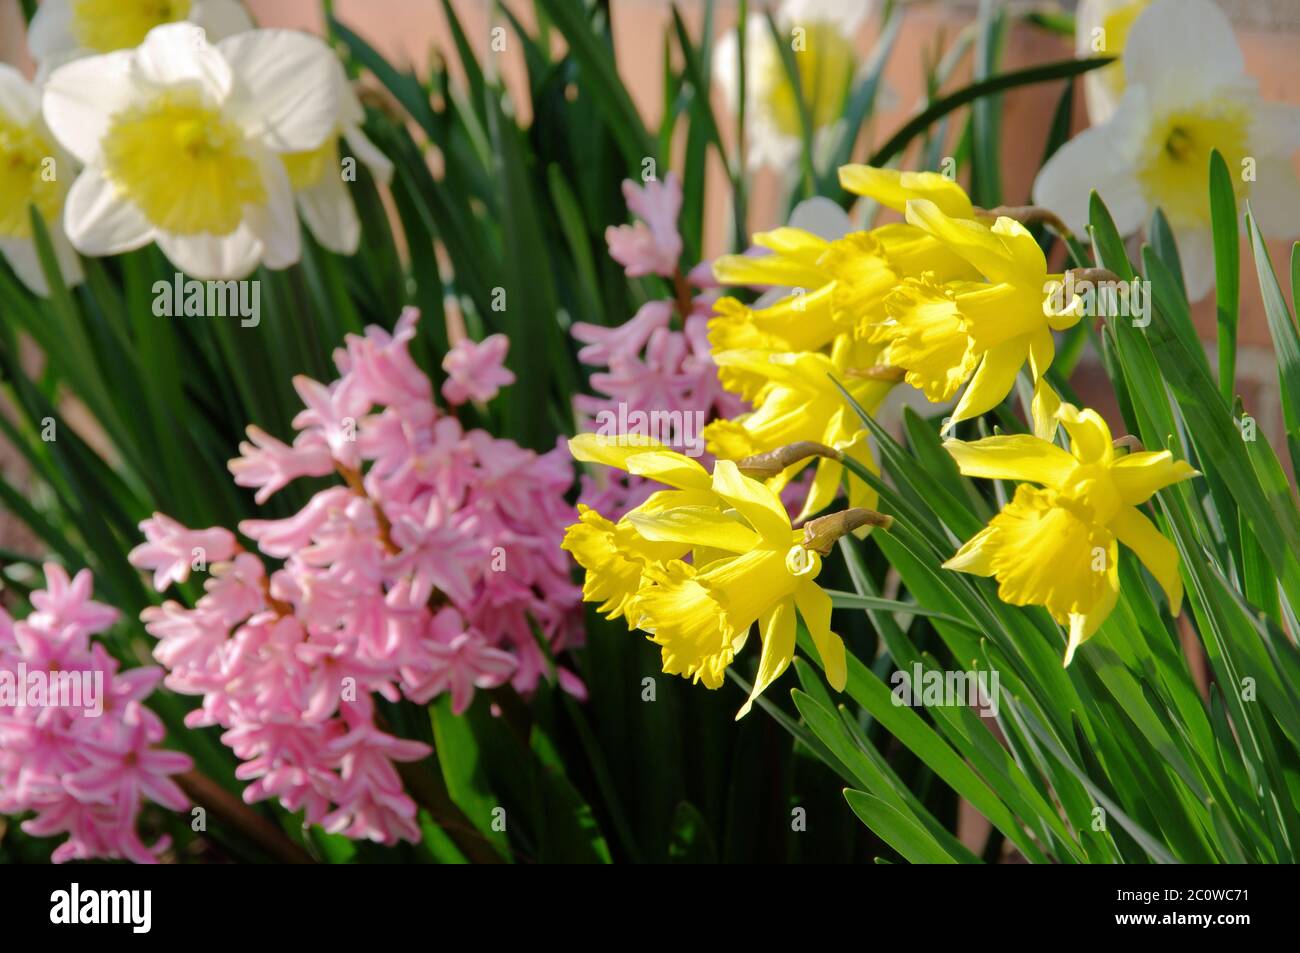 flower plant daffodil hyacinth narcissus pink garden green bloom blossom Stock Photo